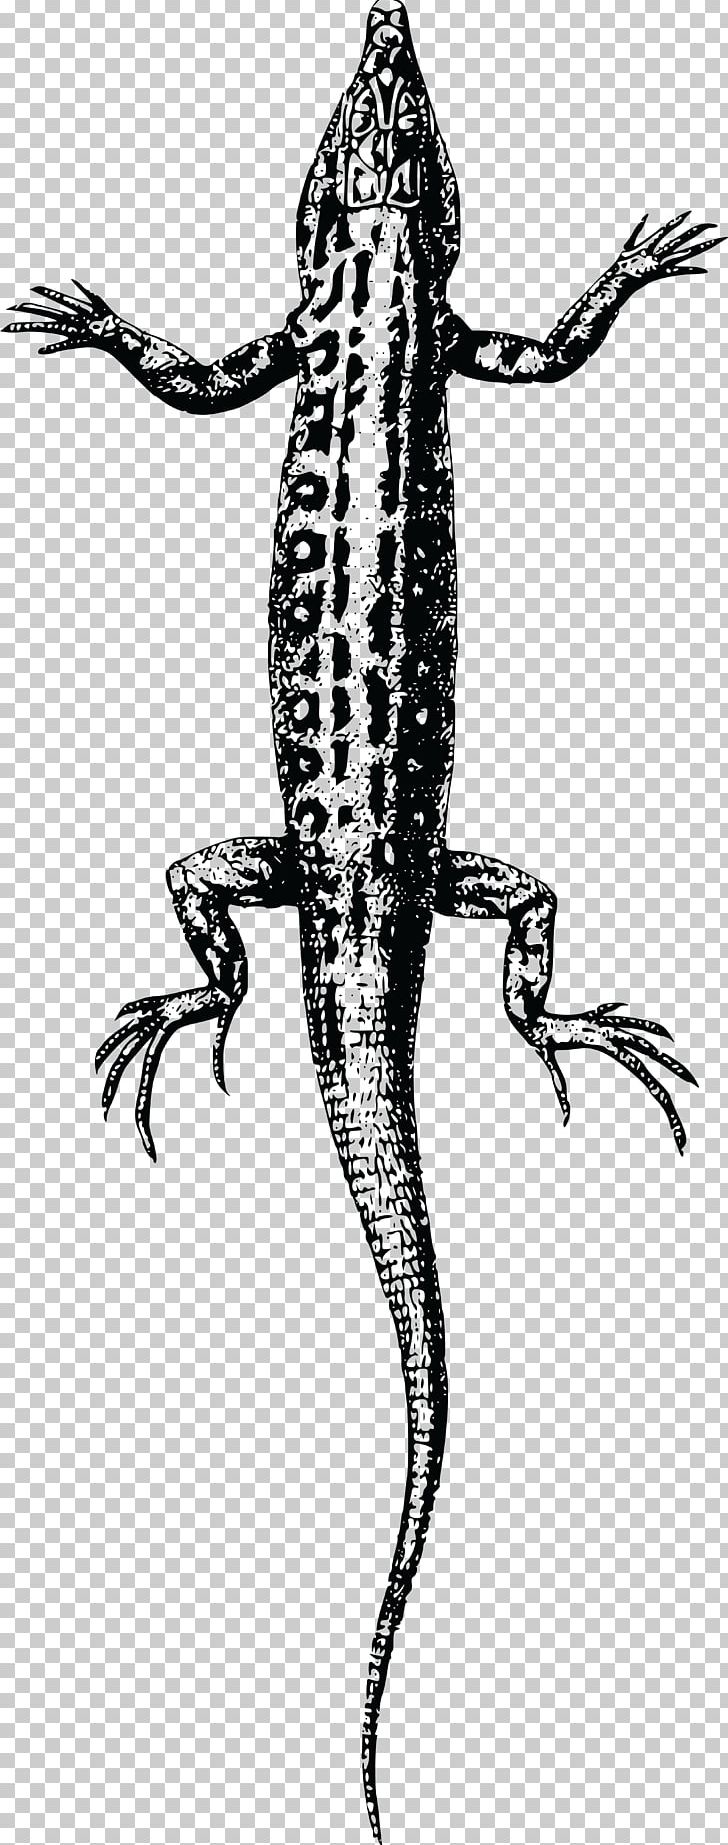 Lizard Reptile PNG, Clipart, Amphibian, Animal, Animals, Art, Black And White Free PNG Download